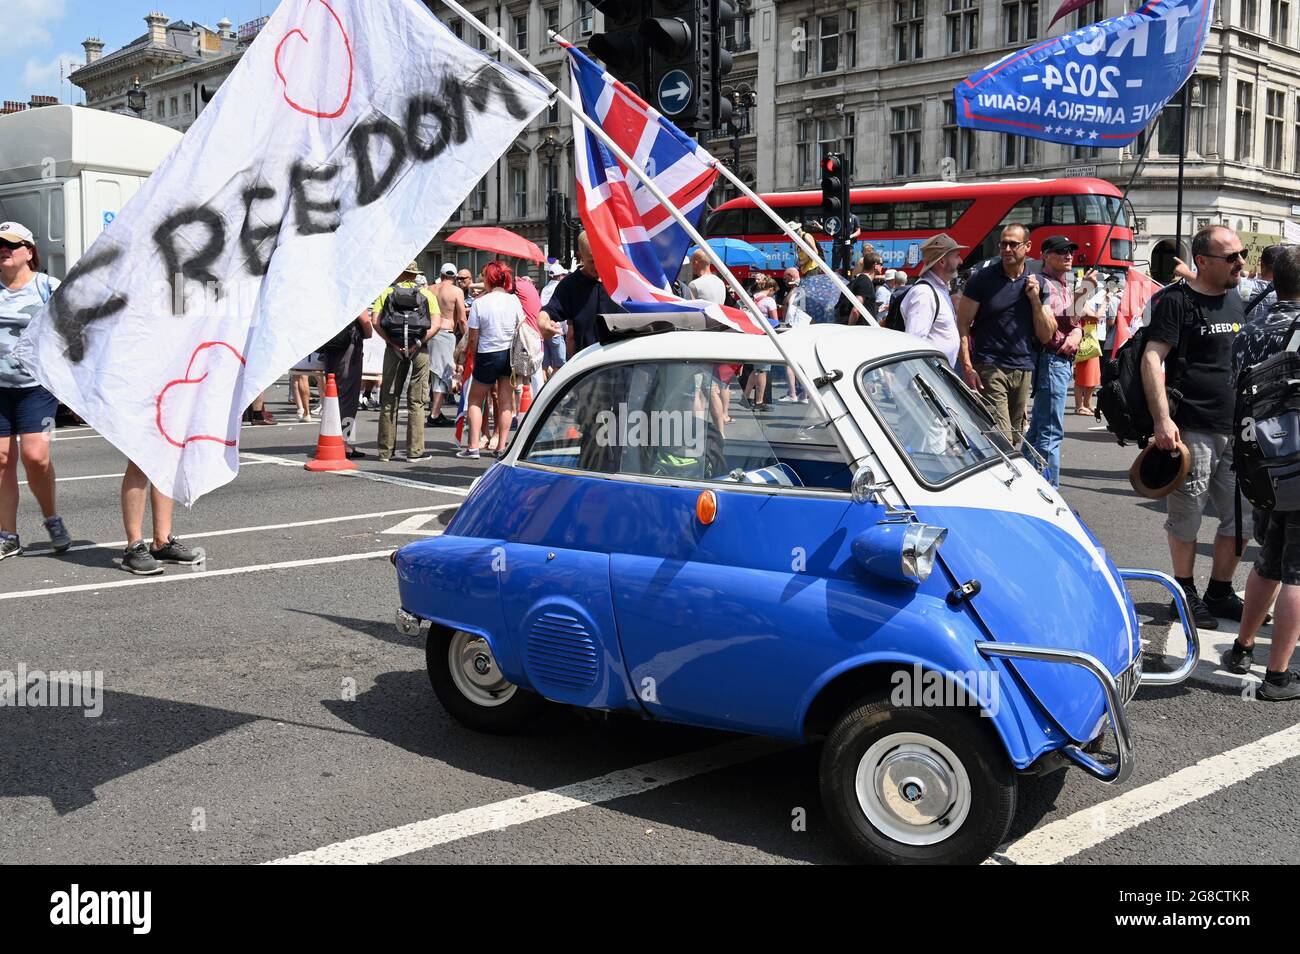 London, UK. Freedom Flag, Freedom Day Protest, Parliament Square, Westminster. Credit: michael melia/Alamy Live News Stock Photo